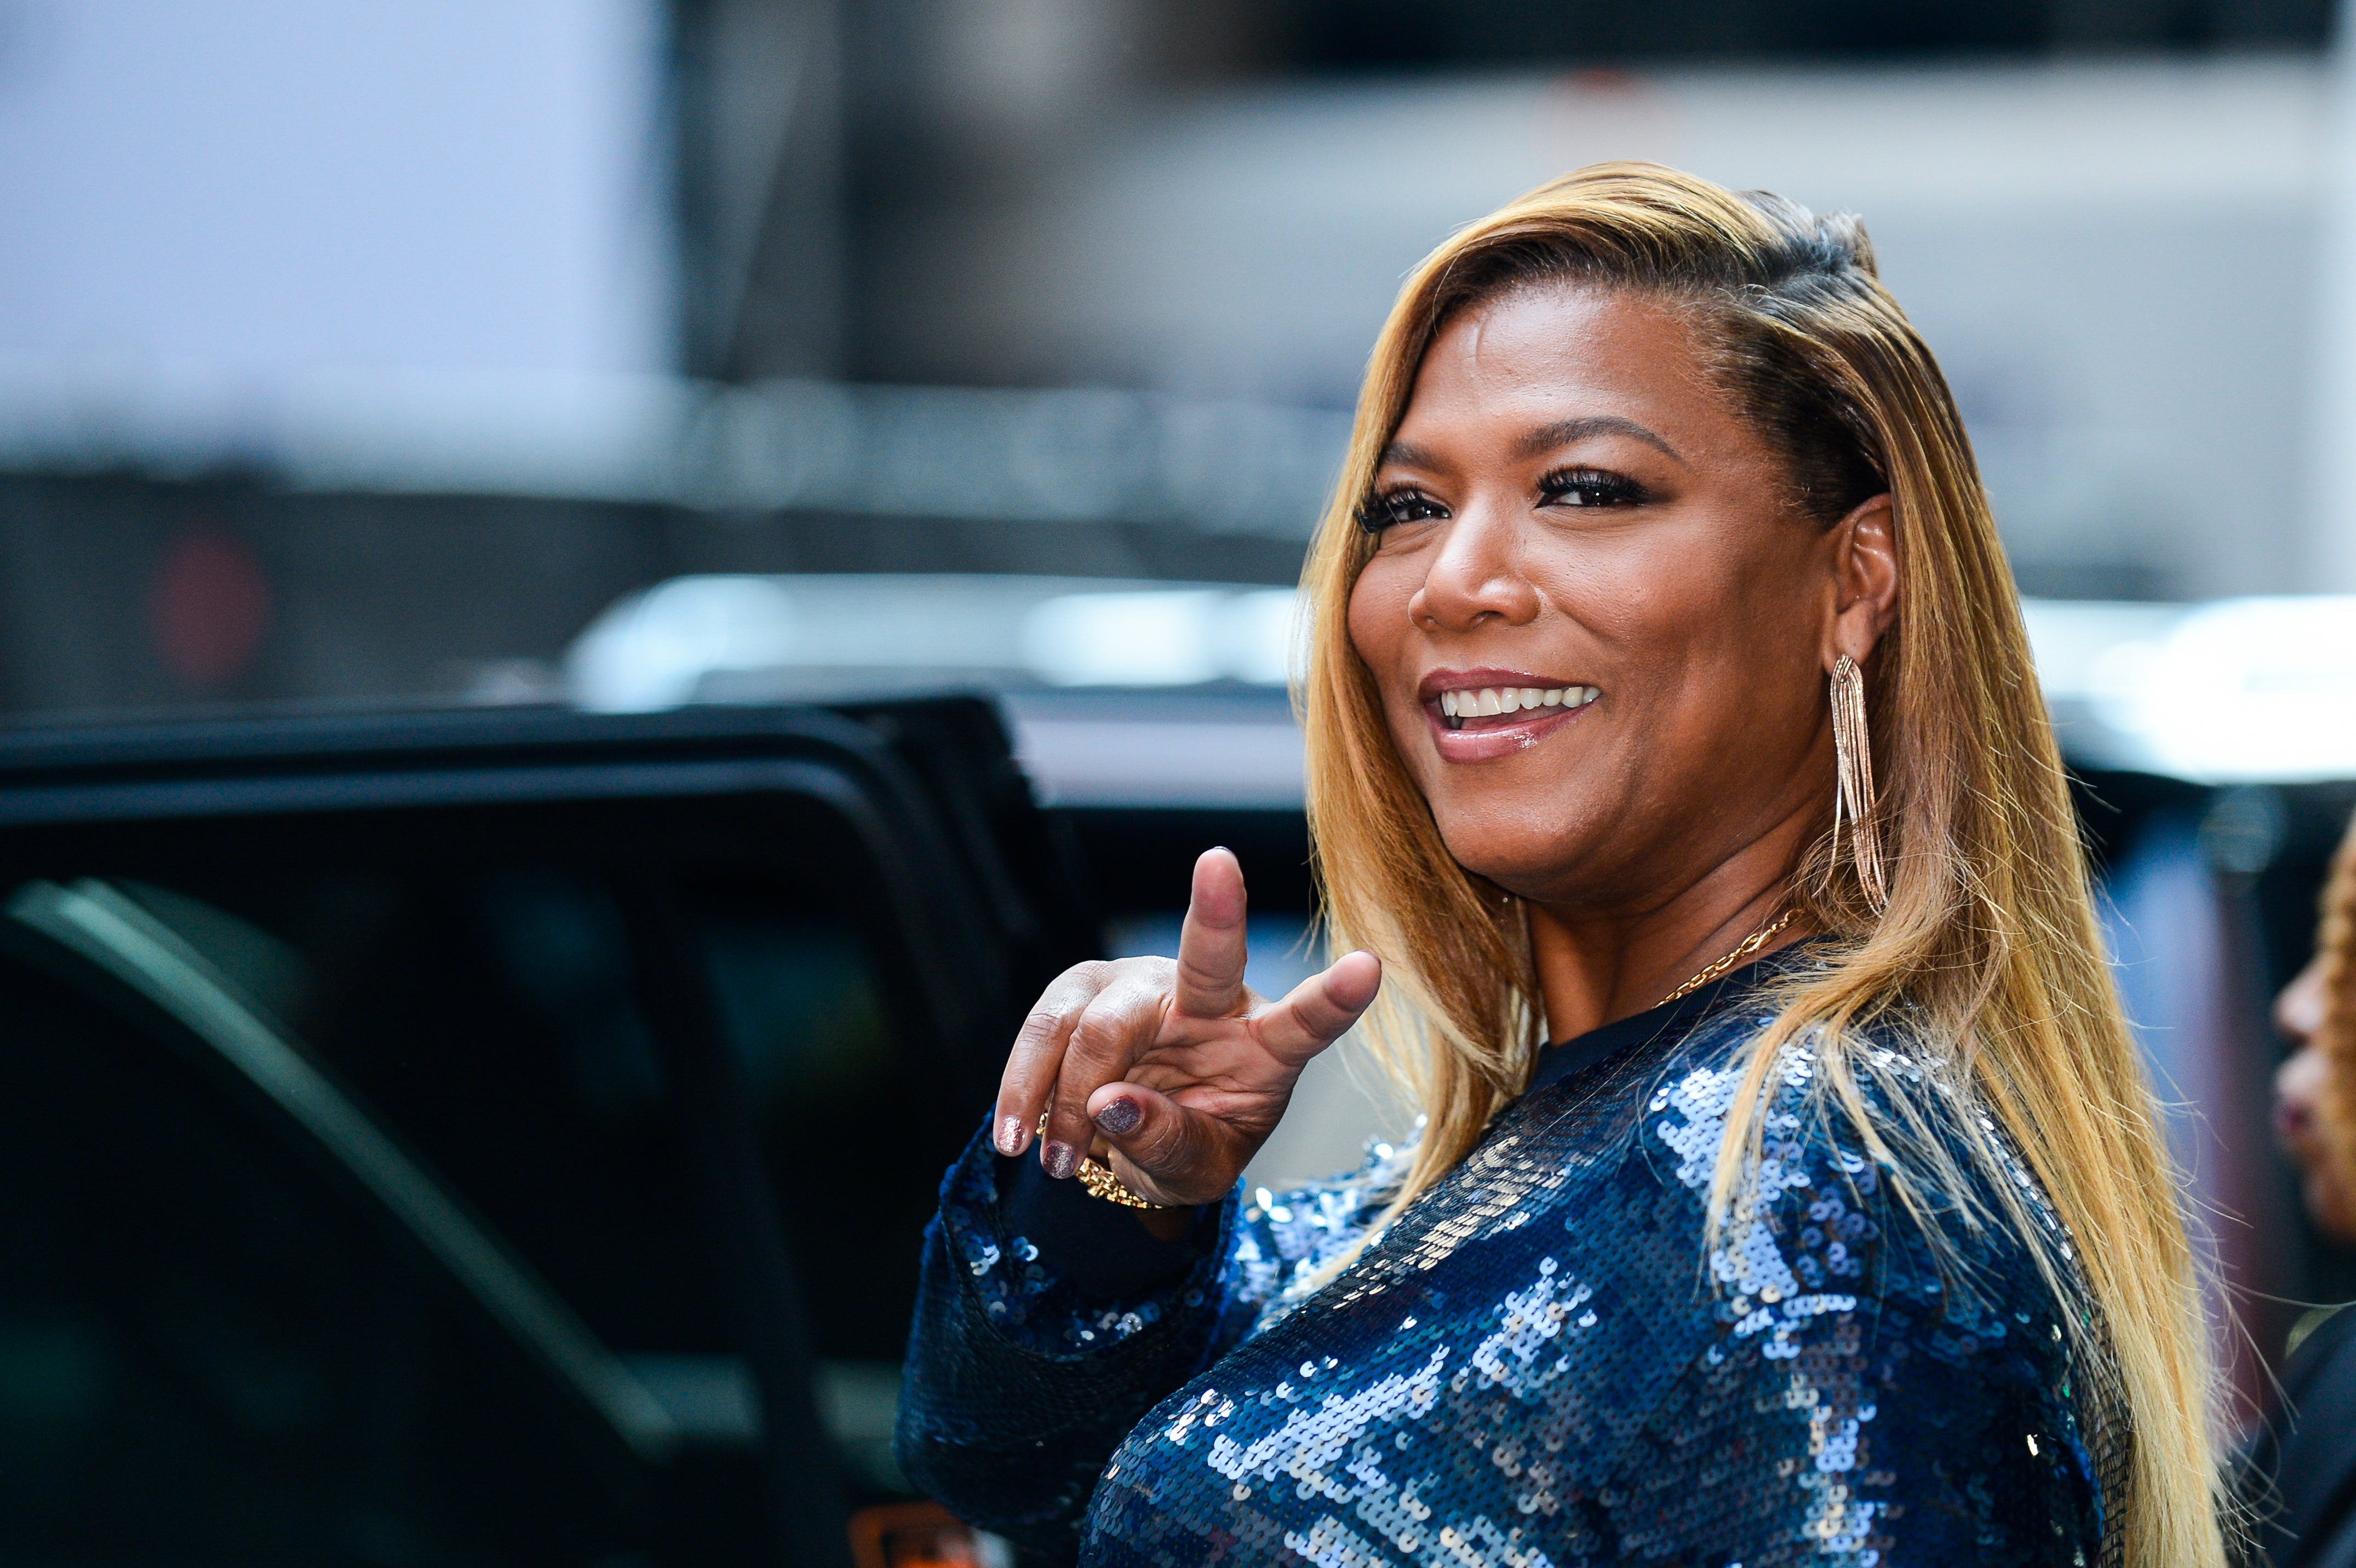 Queen Latifah Reflects On Getting Rid of the 'Ashy Stuff' For Her CoverGirl Queen Collection
